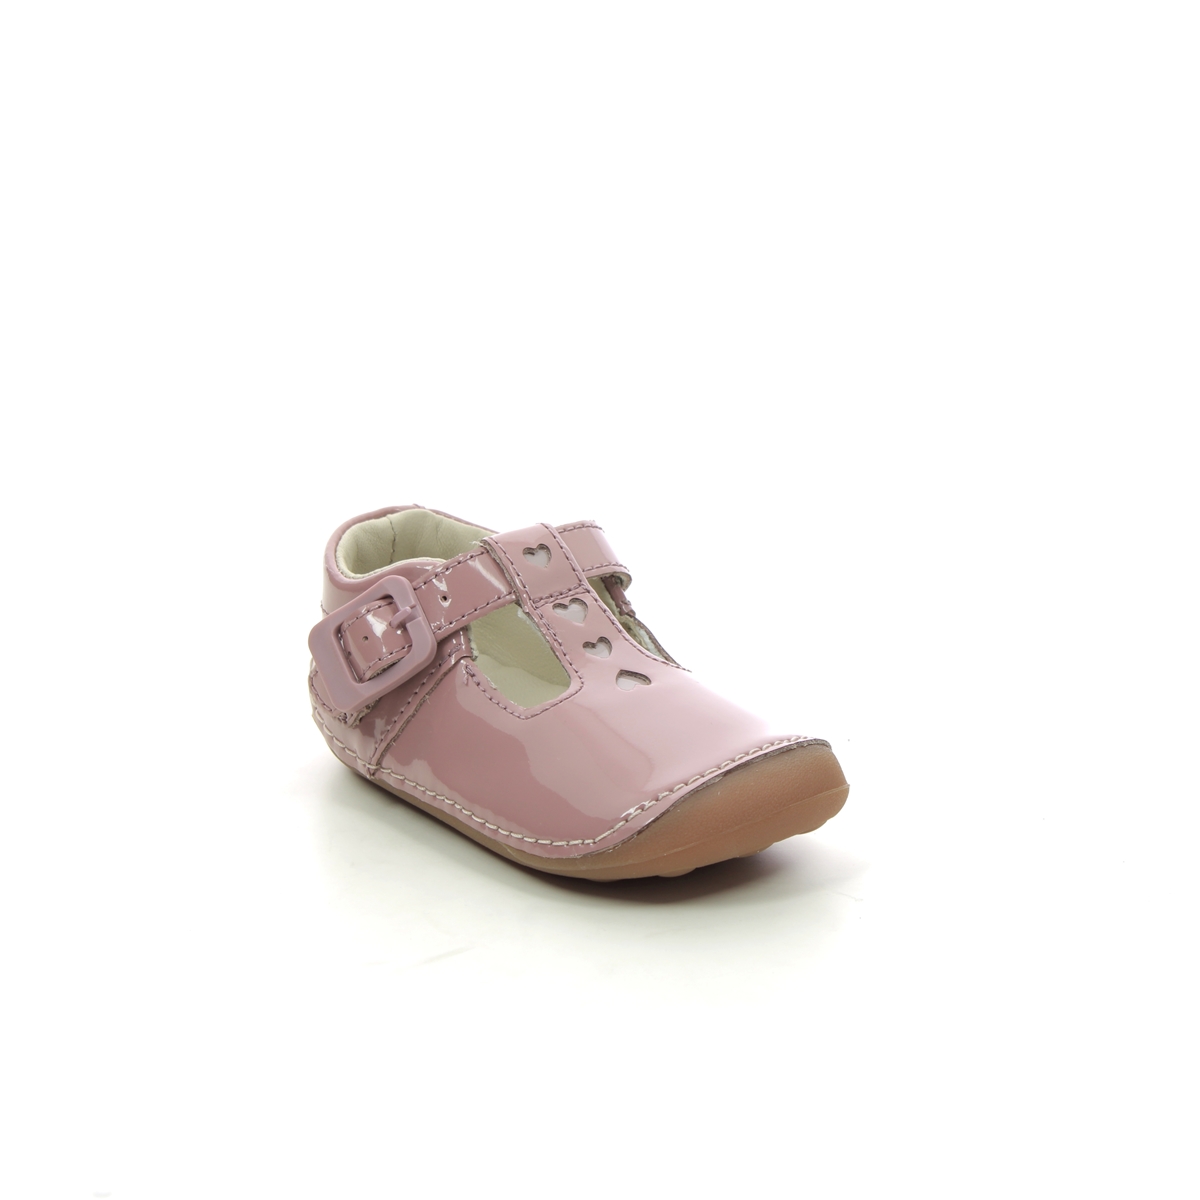 Clarks Tiny Beat T Pink Kids Girls First And Baby Shoes 694087G In Size 4 In Plain Pink G Width Fitting For kids